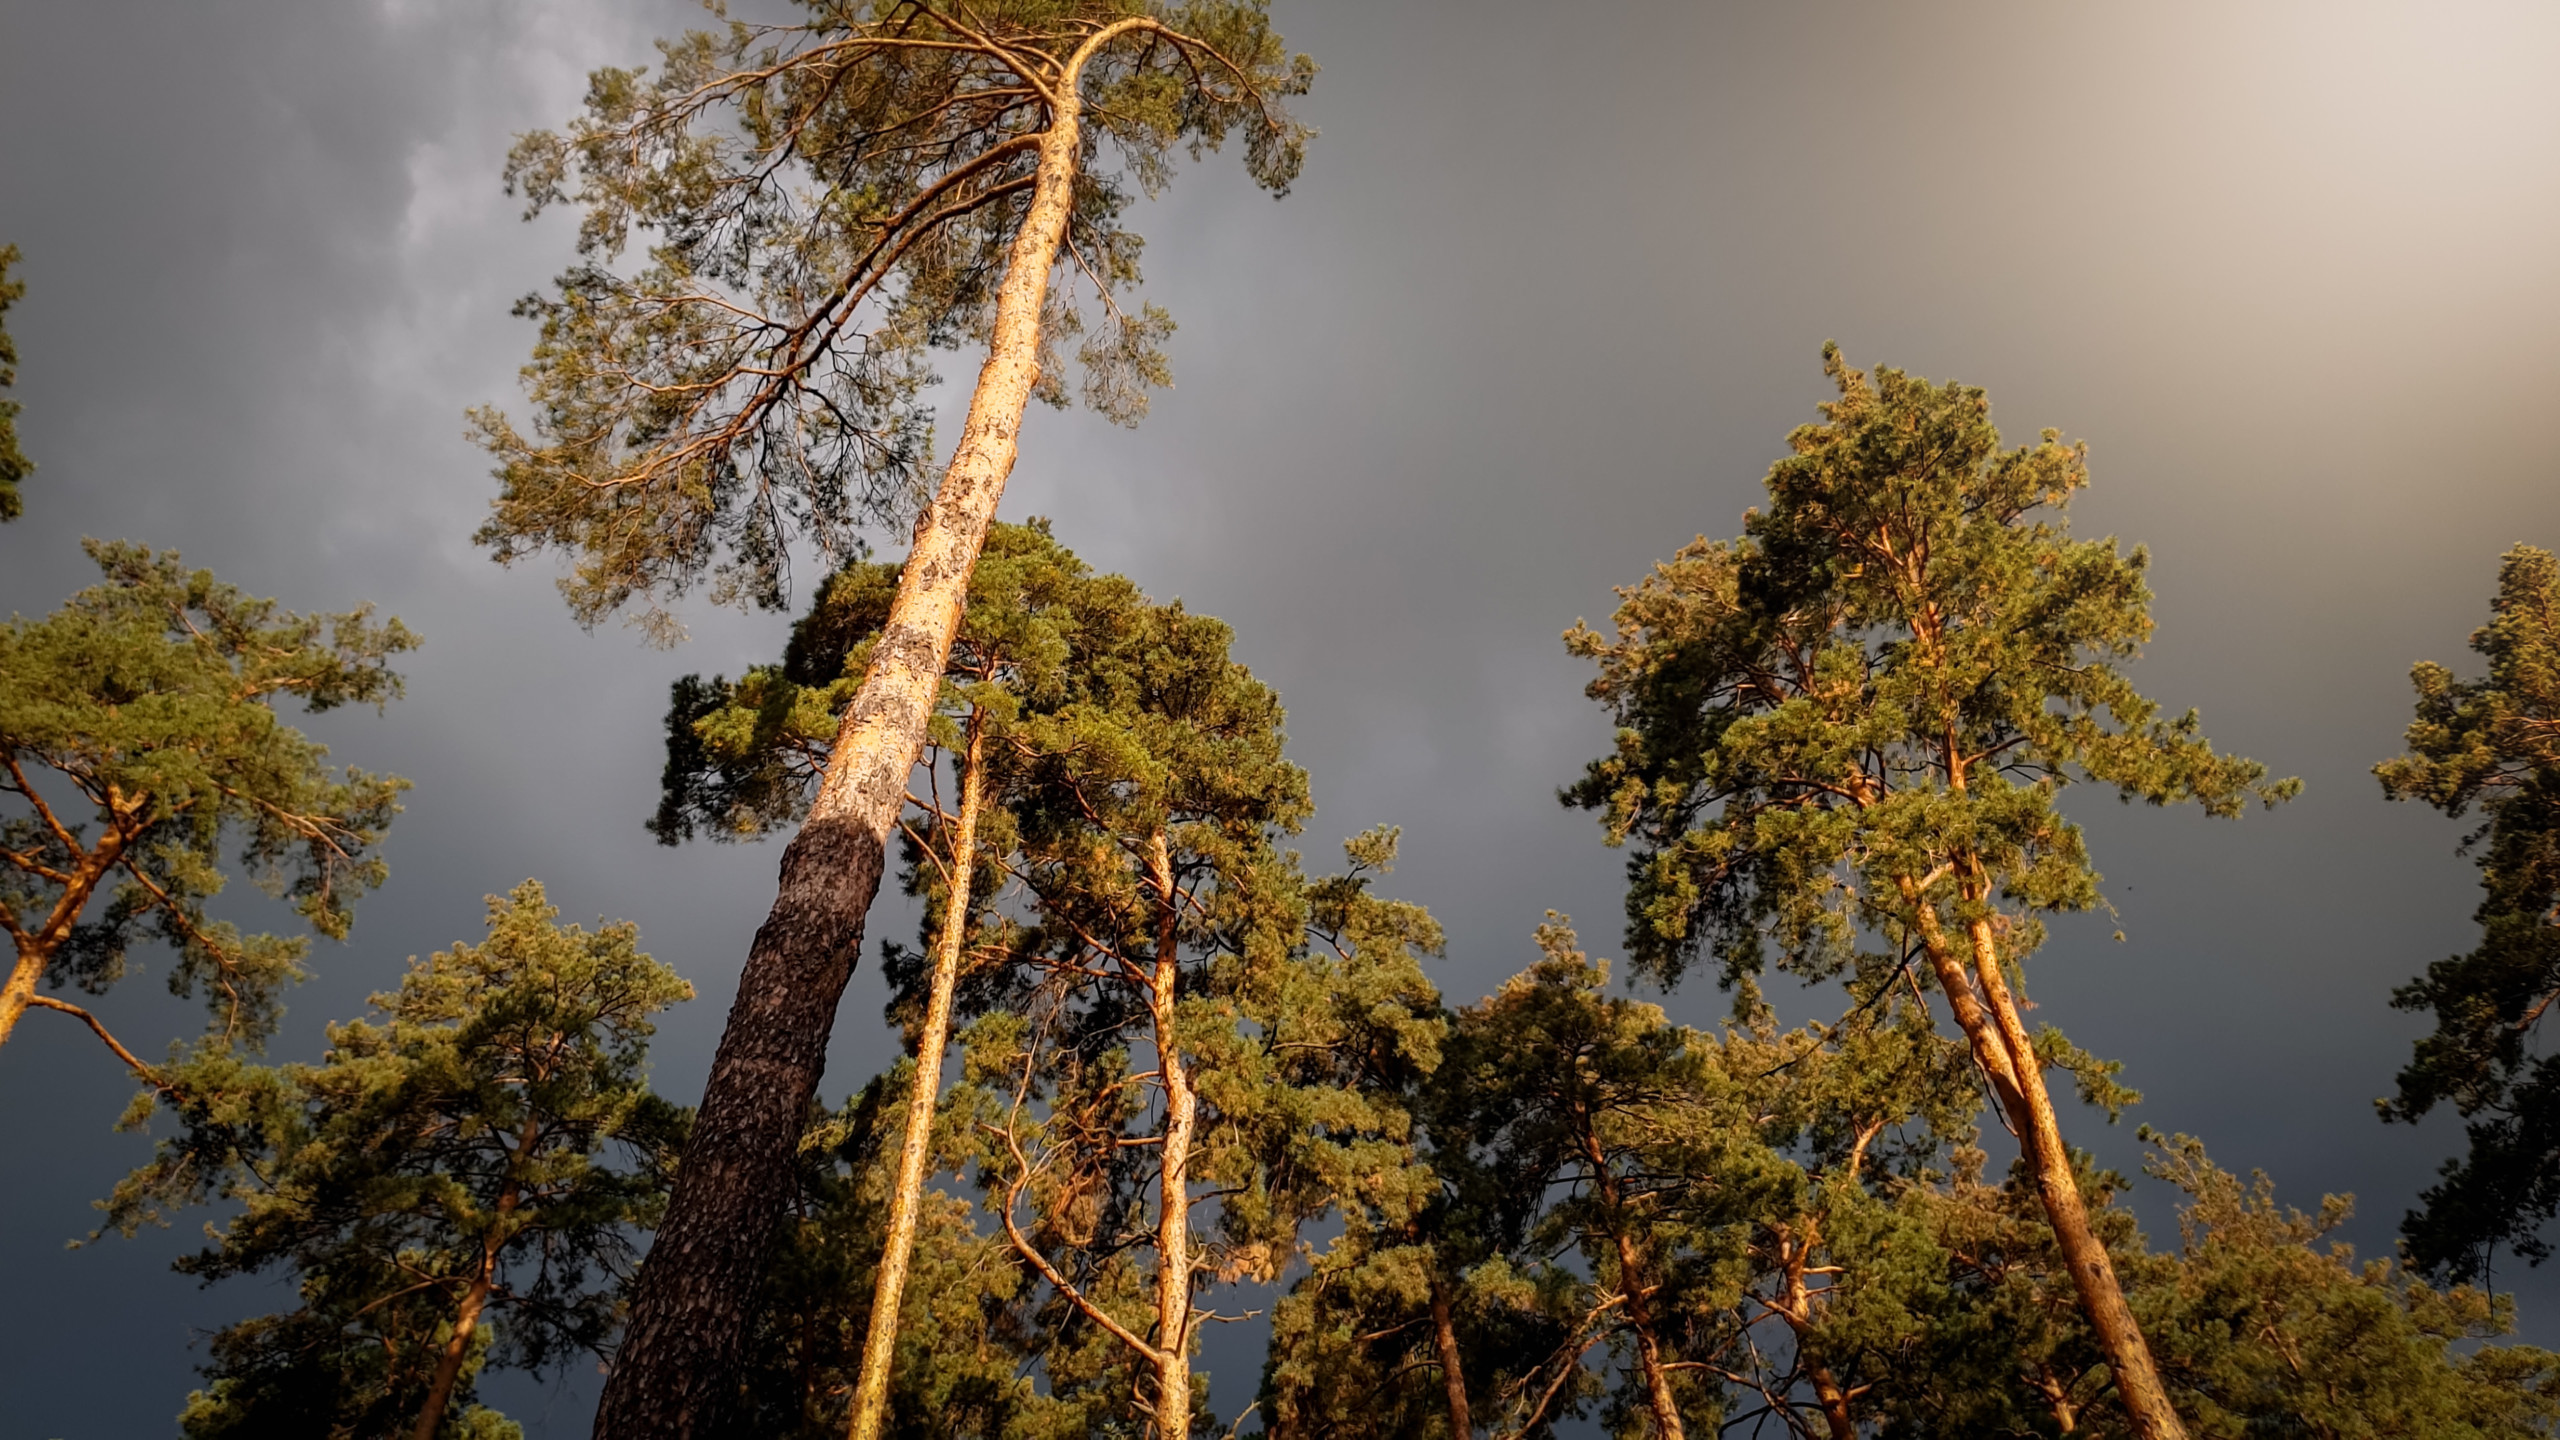 Beautiful landscape image of high pine tree in forest against dark sky with heavy rainy clouds